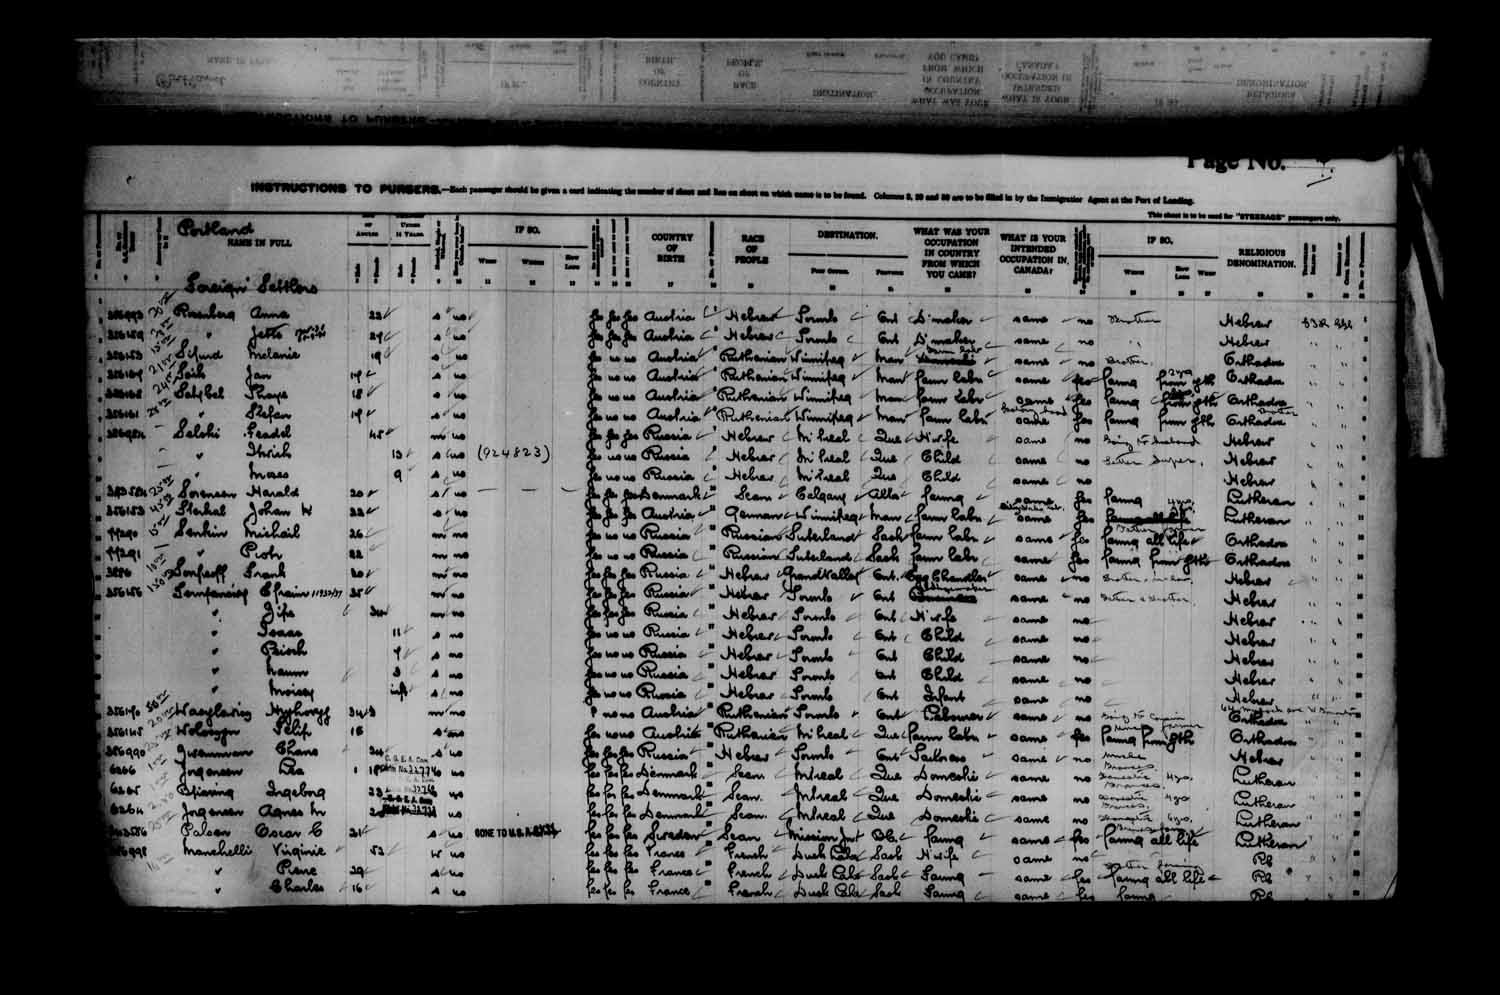 Digitized page of Passenger Lists for Image No.: e003622995